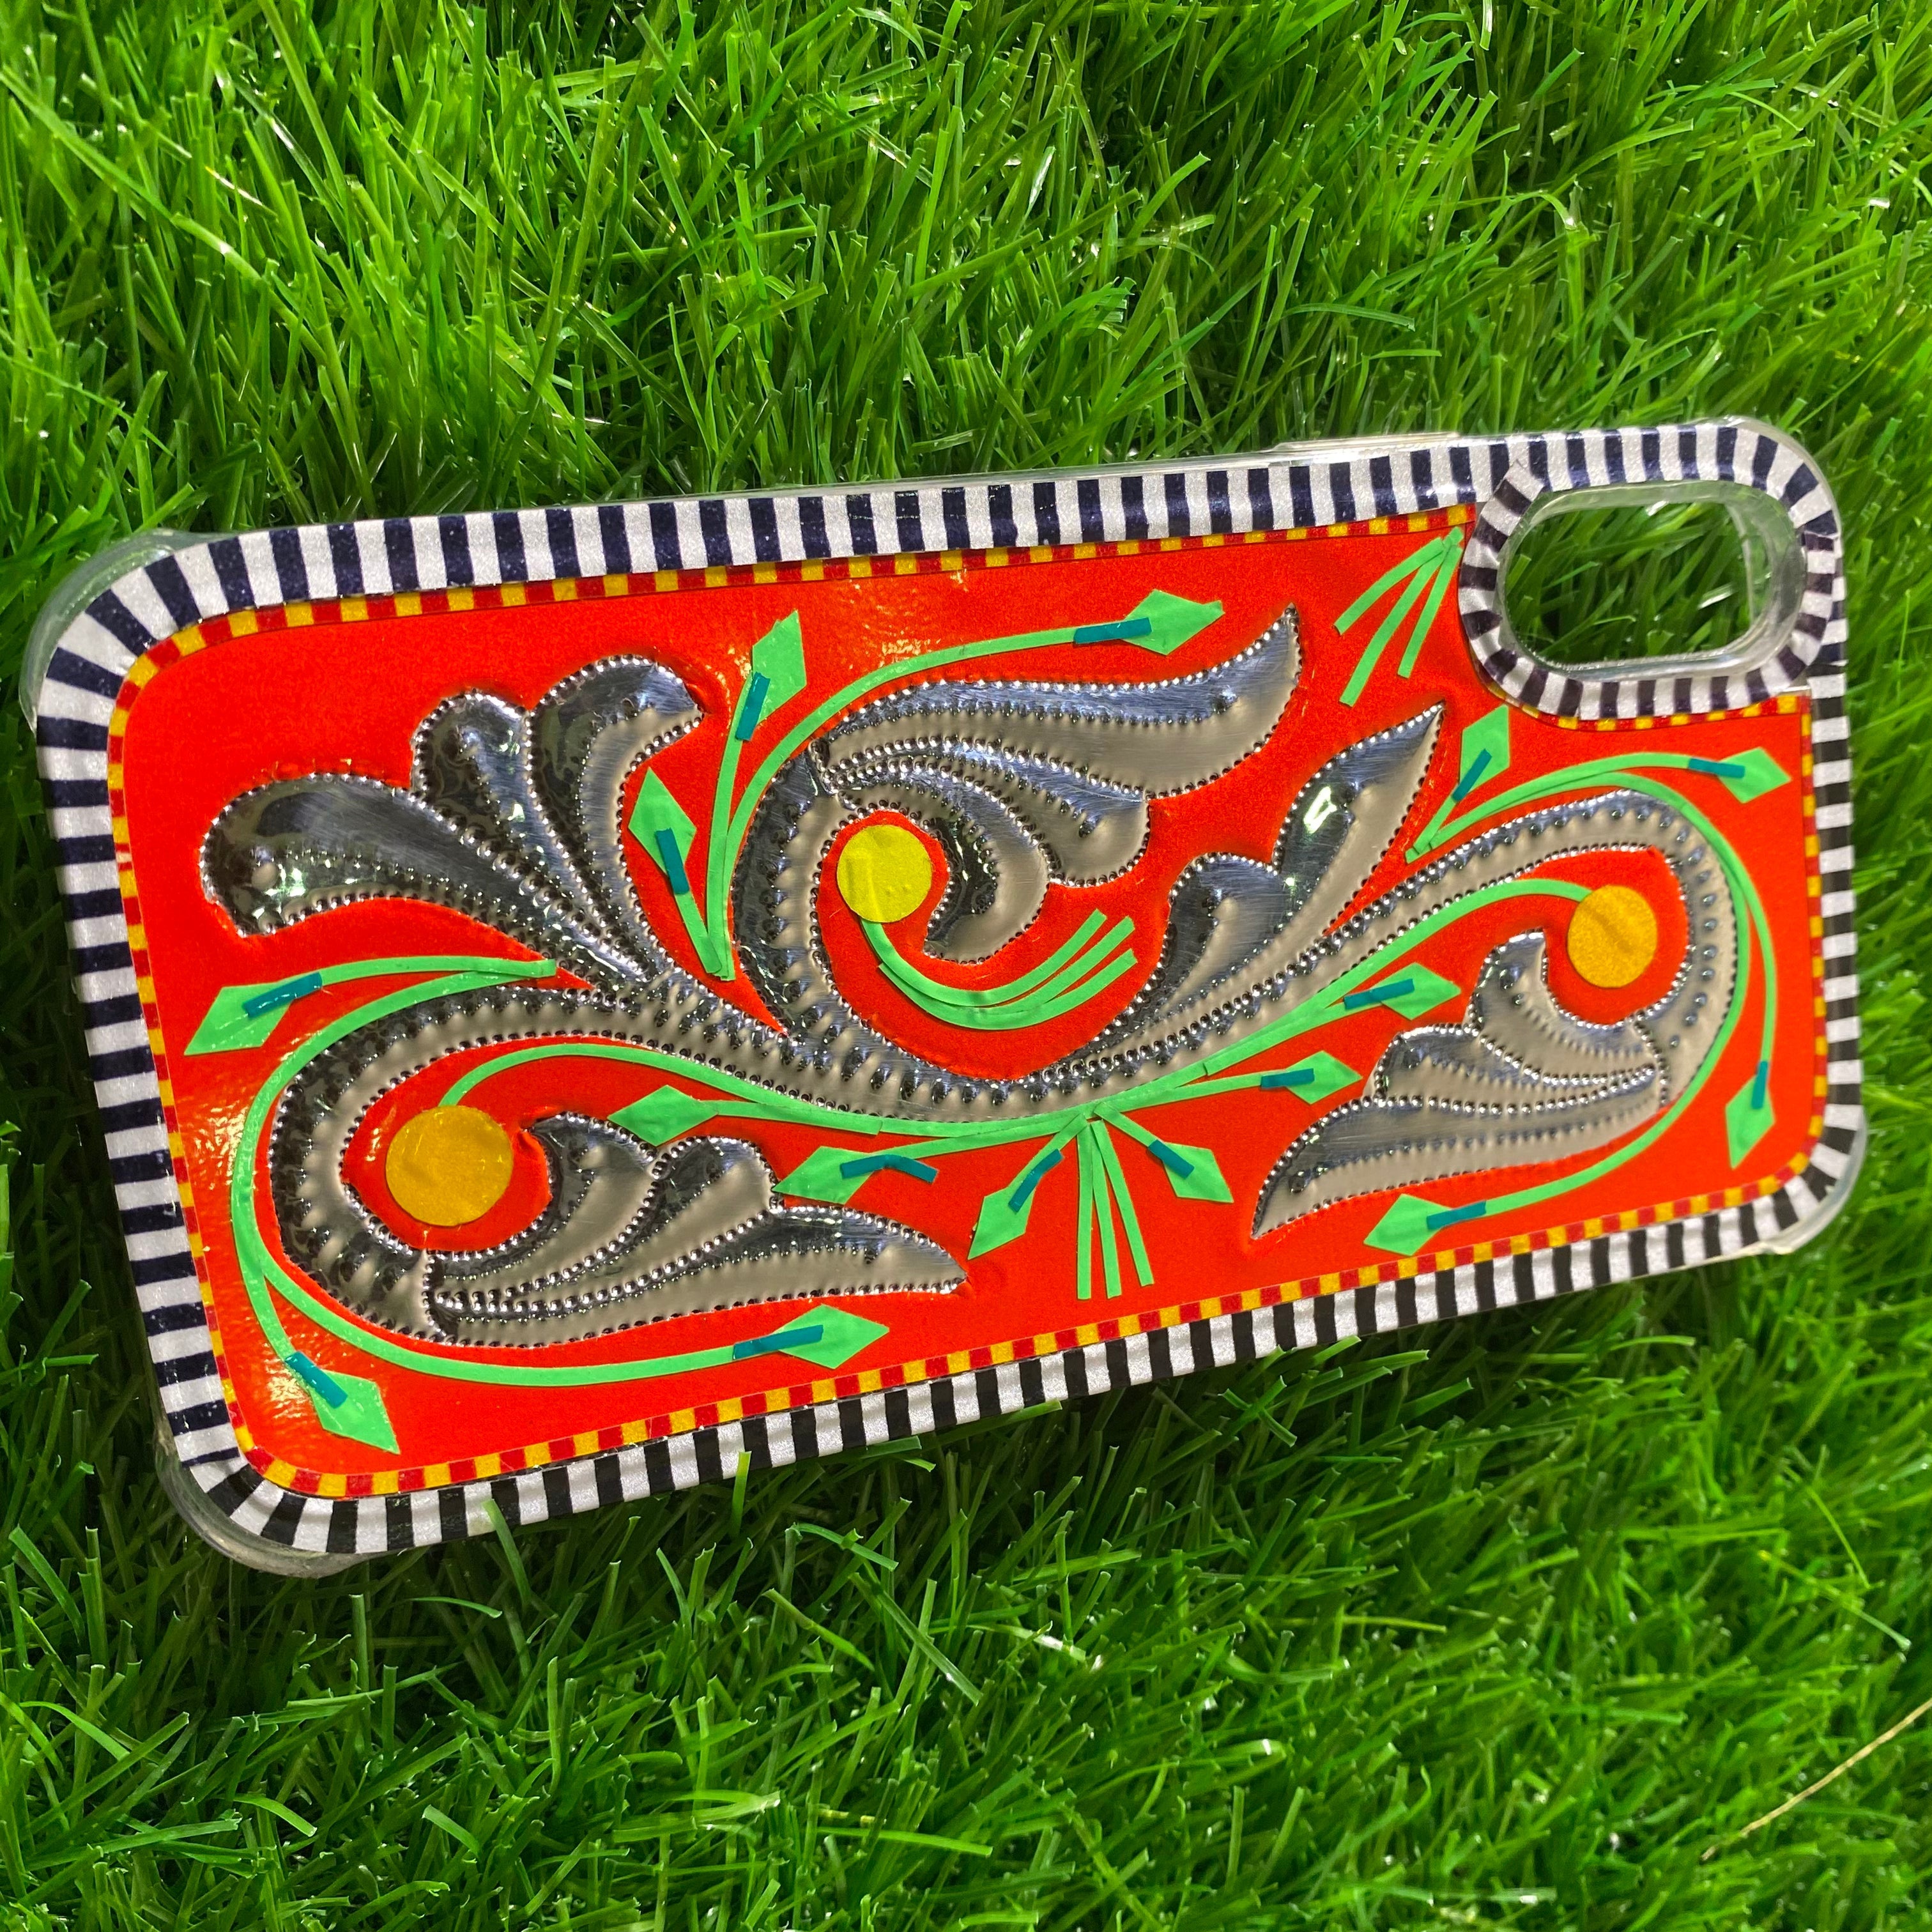 Red Truck Art Mobile Covers Handcrafted